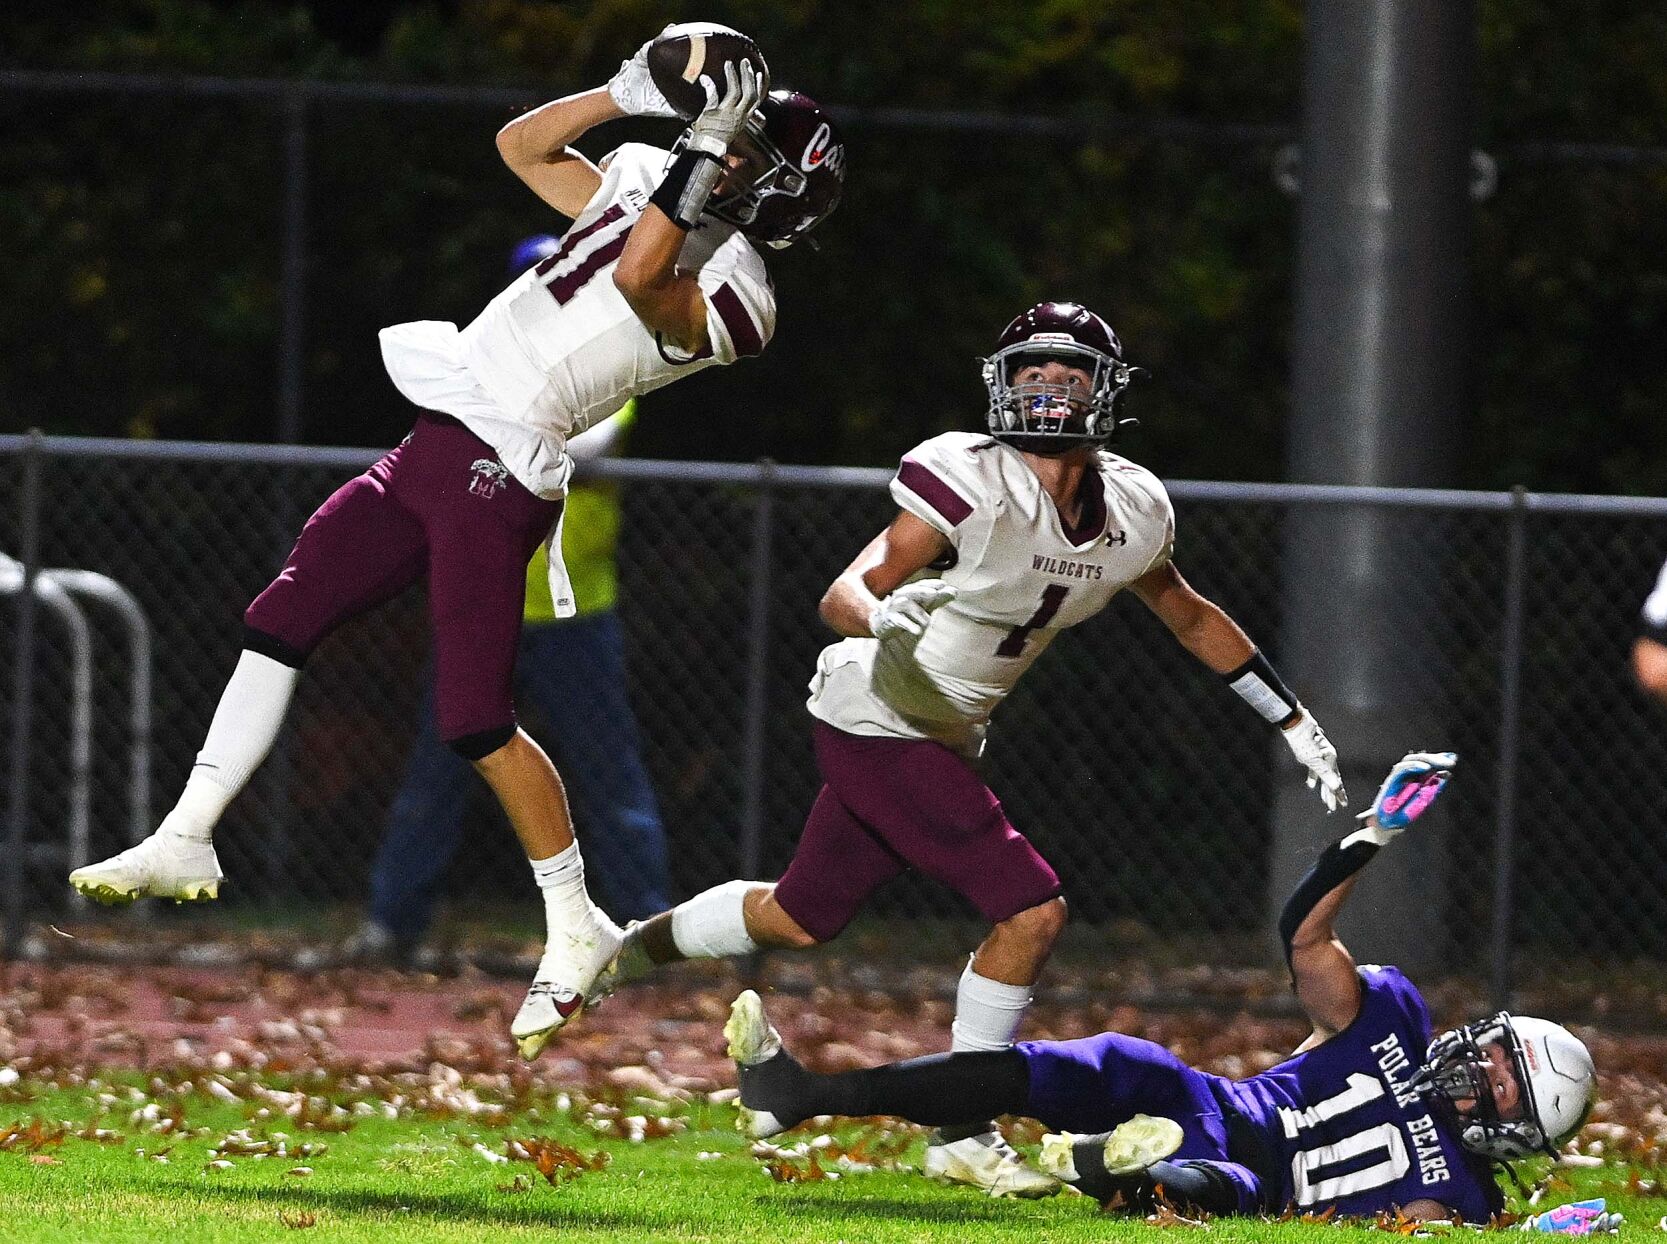 Mechanicsburg Defense Shines in Victory over Northern with Turnovers and Big Plays